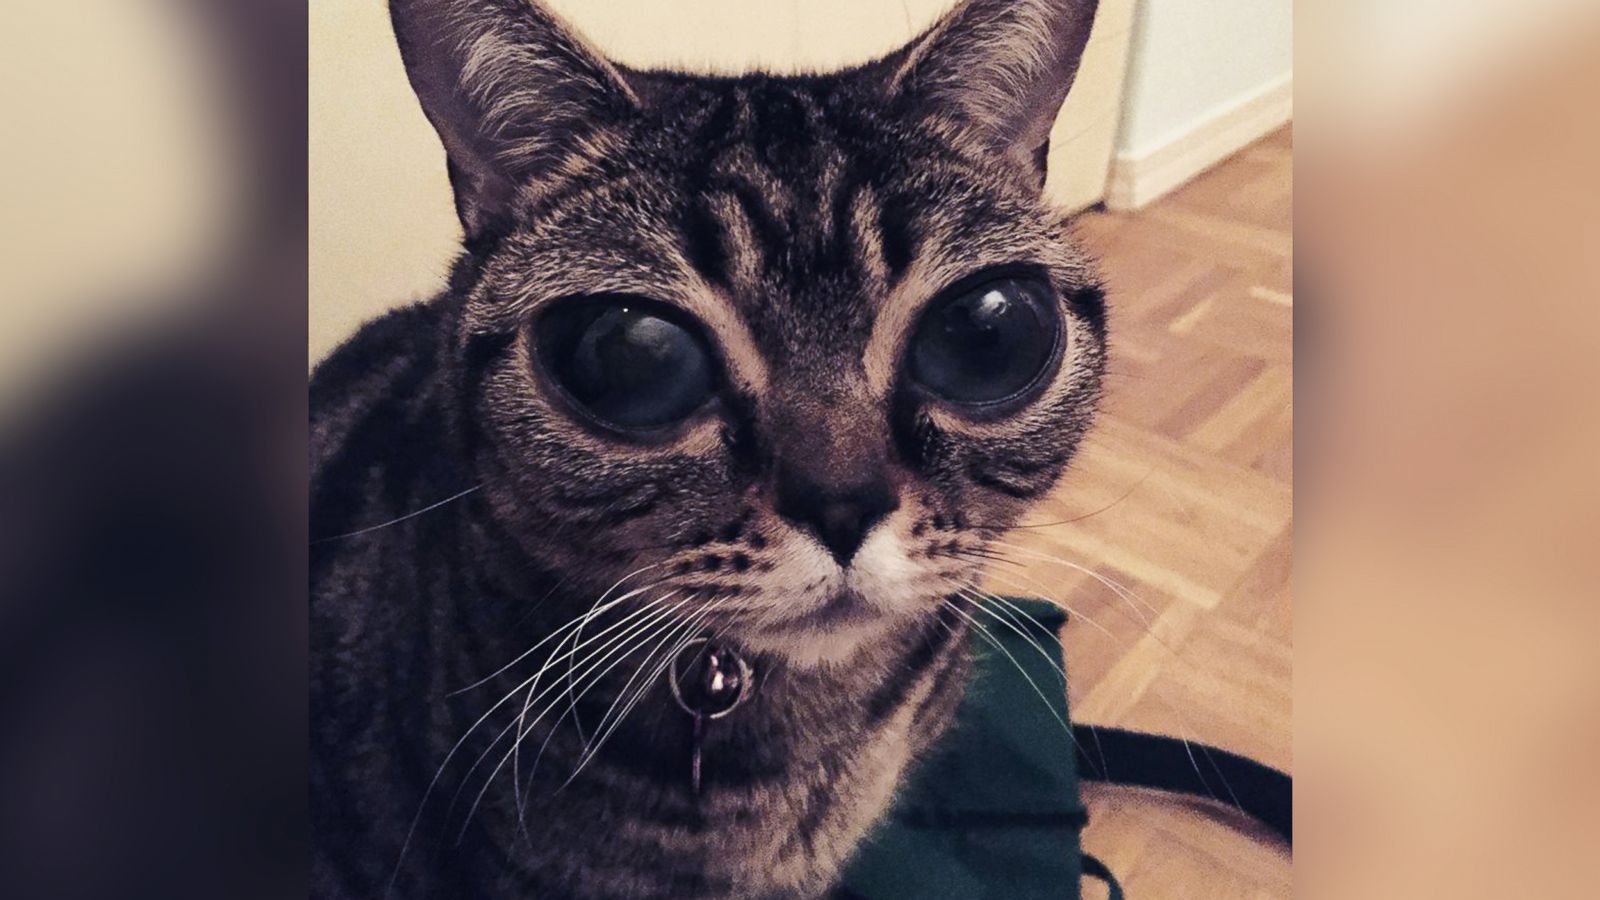 How Matilda, the Alien-Eyed Cat, Came to Have Her Celestial Eyes - ABC News